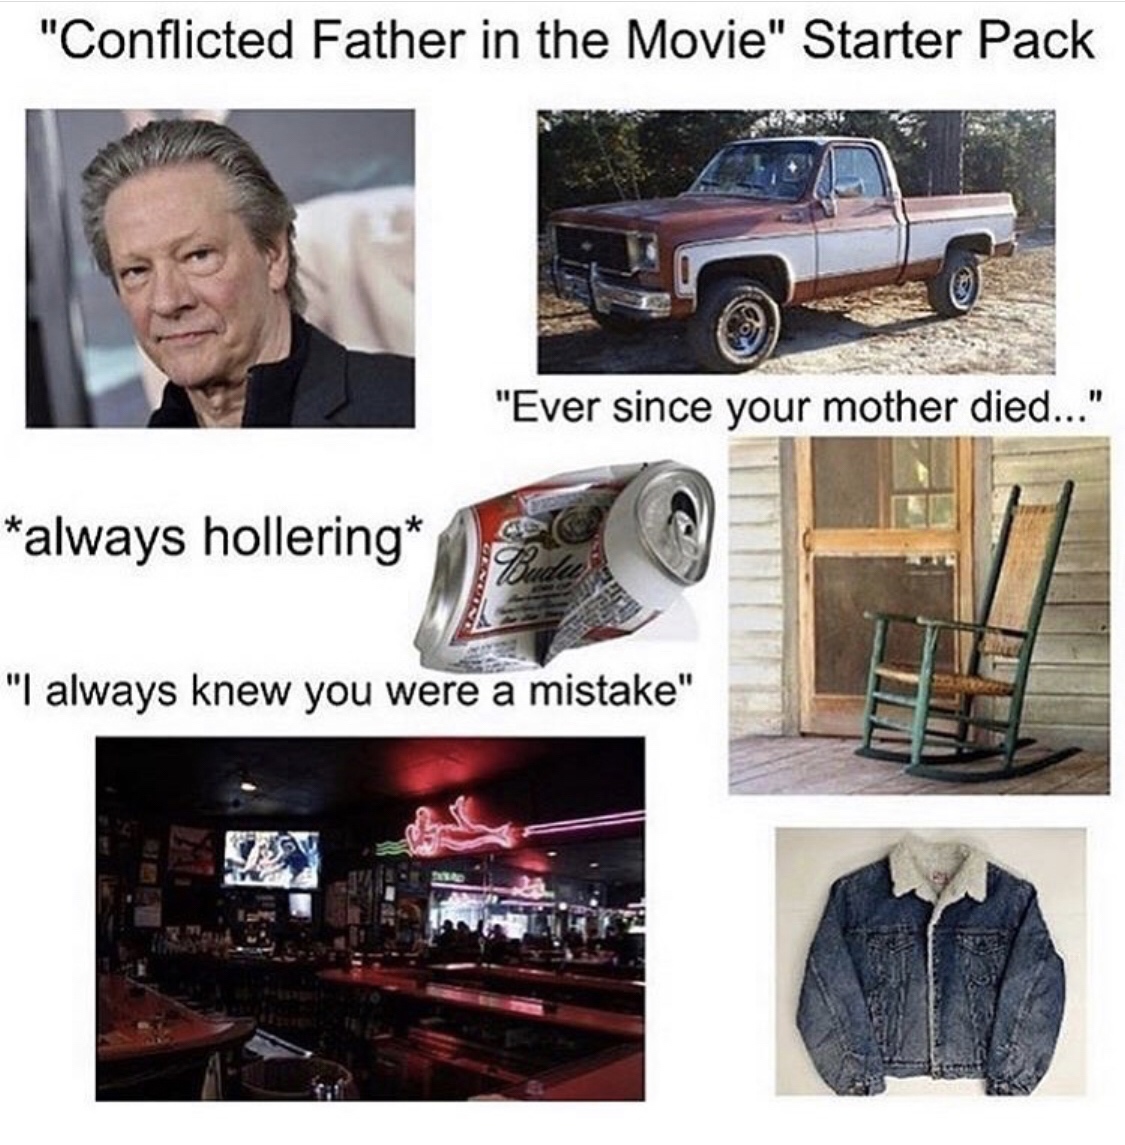 starter pack meme - "Conflicted Father in the Movie" Starter Pack "Ever since your mother died..." always hollering "I always knew you were a mistake"